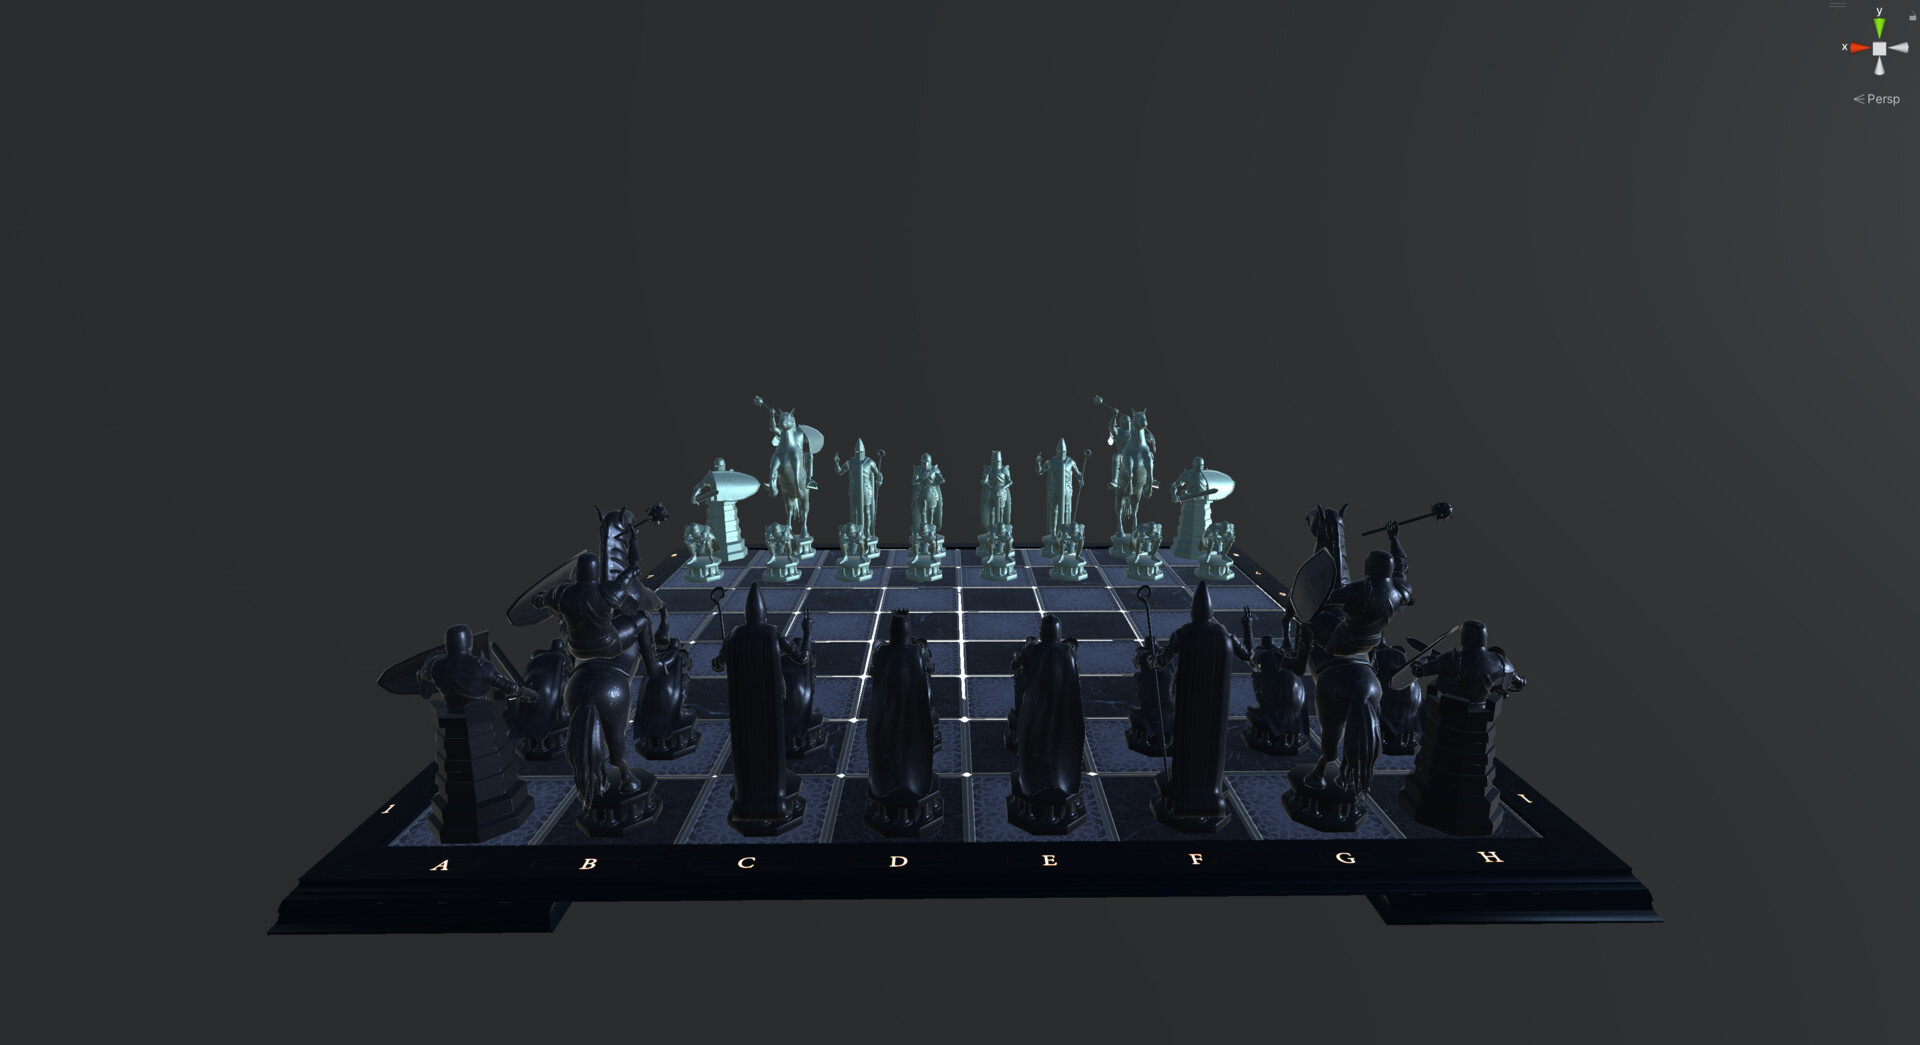 Unity3D chess project - Chessforeva